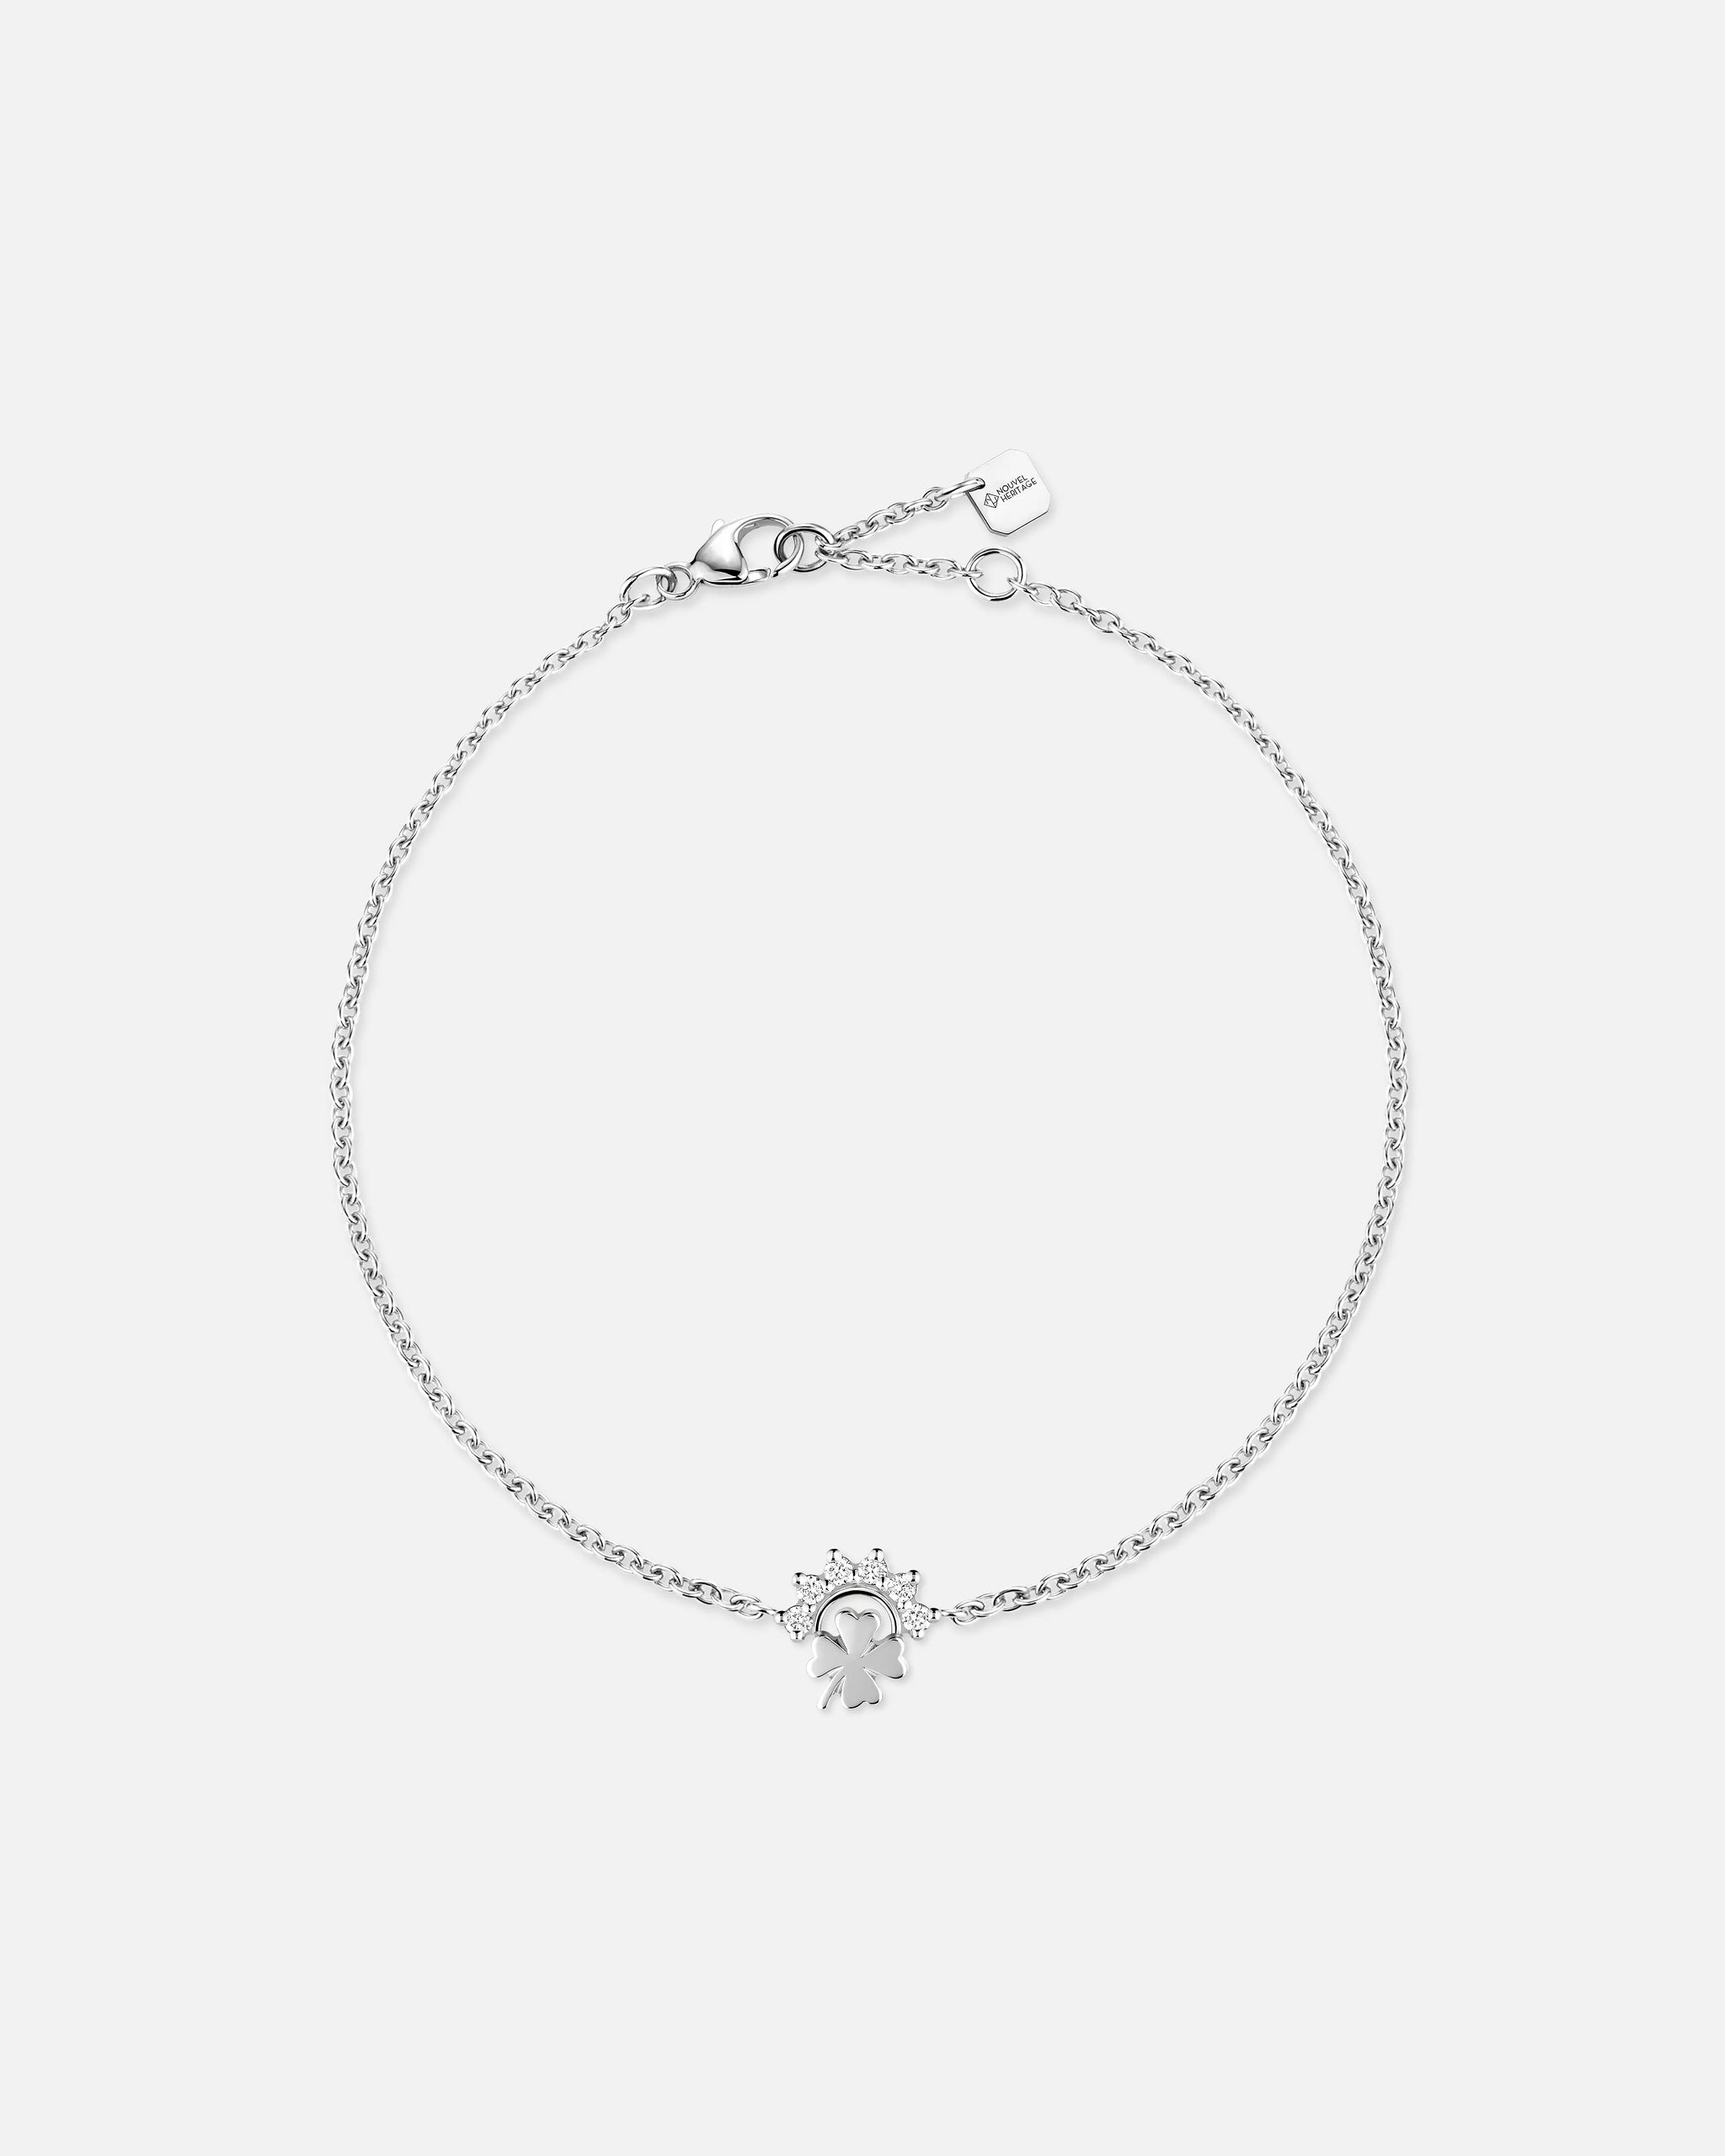 Small Luck Bracelet in White Gold - 1 - Nouvel Heritage